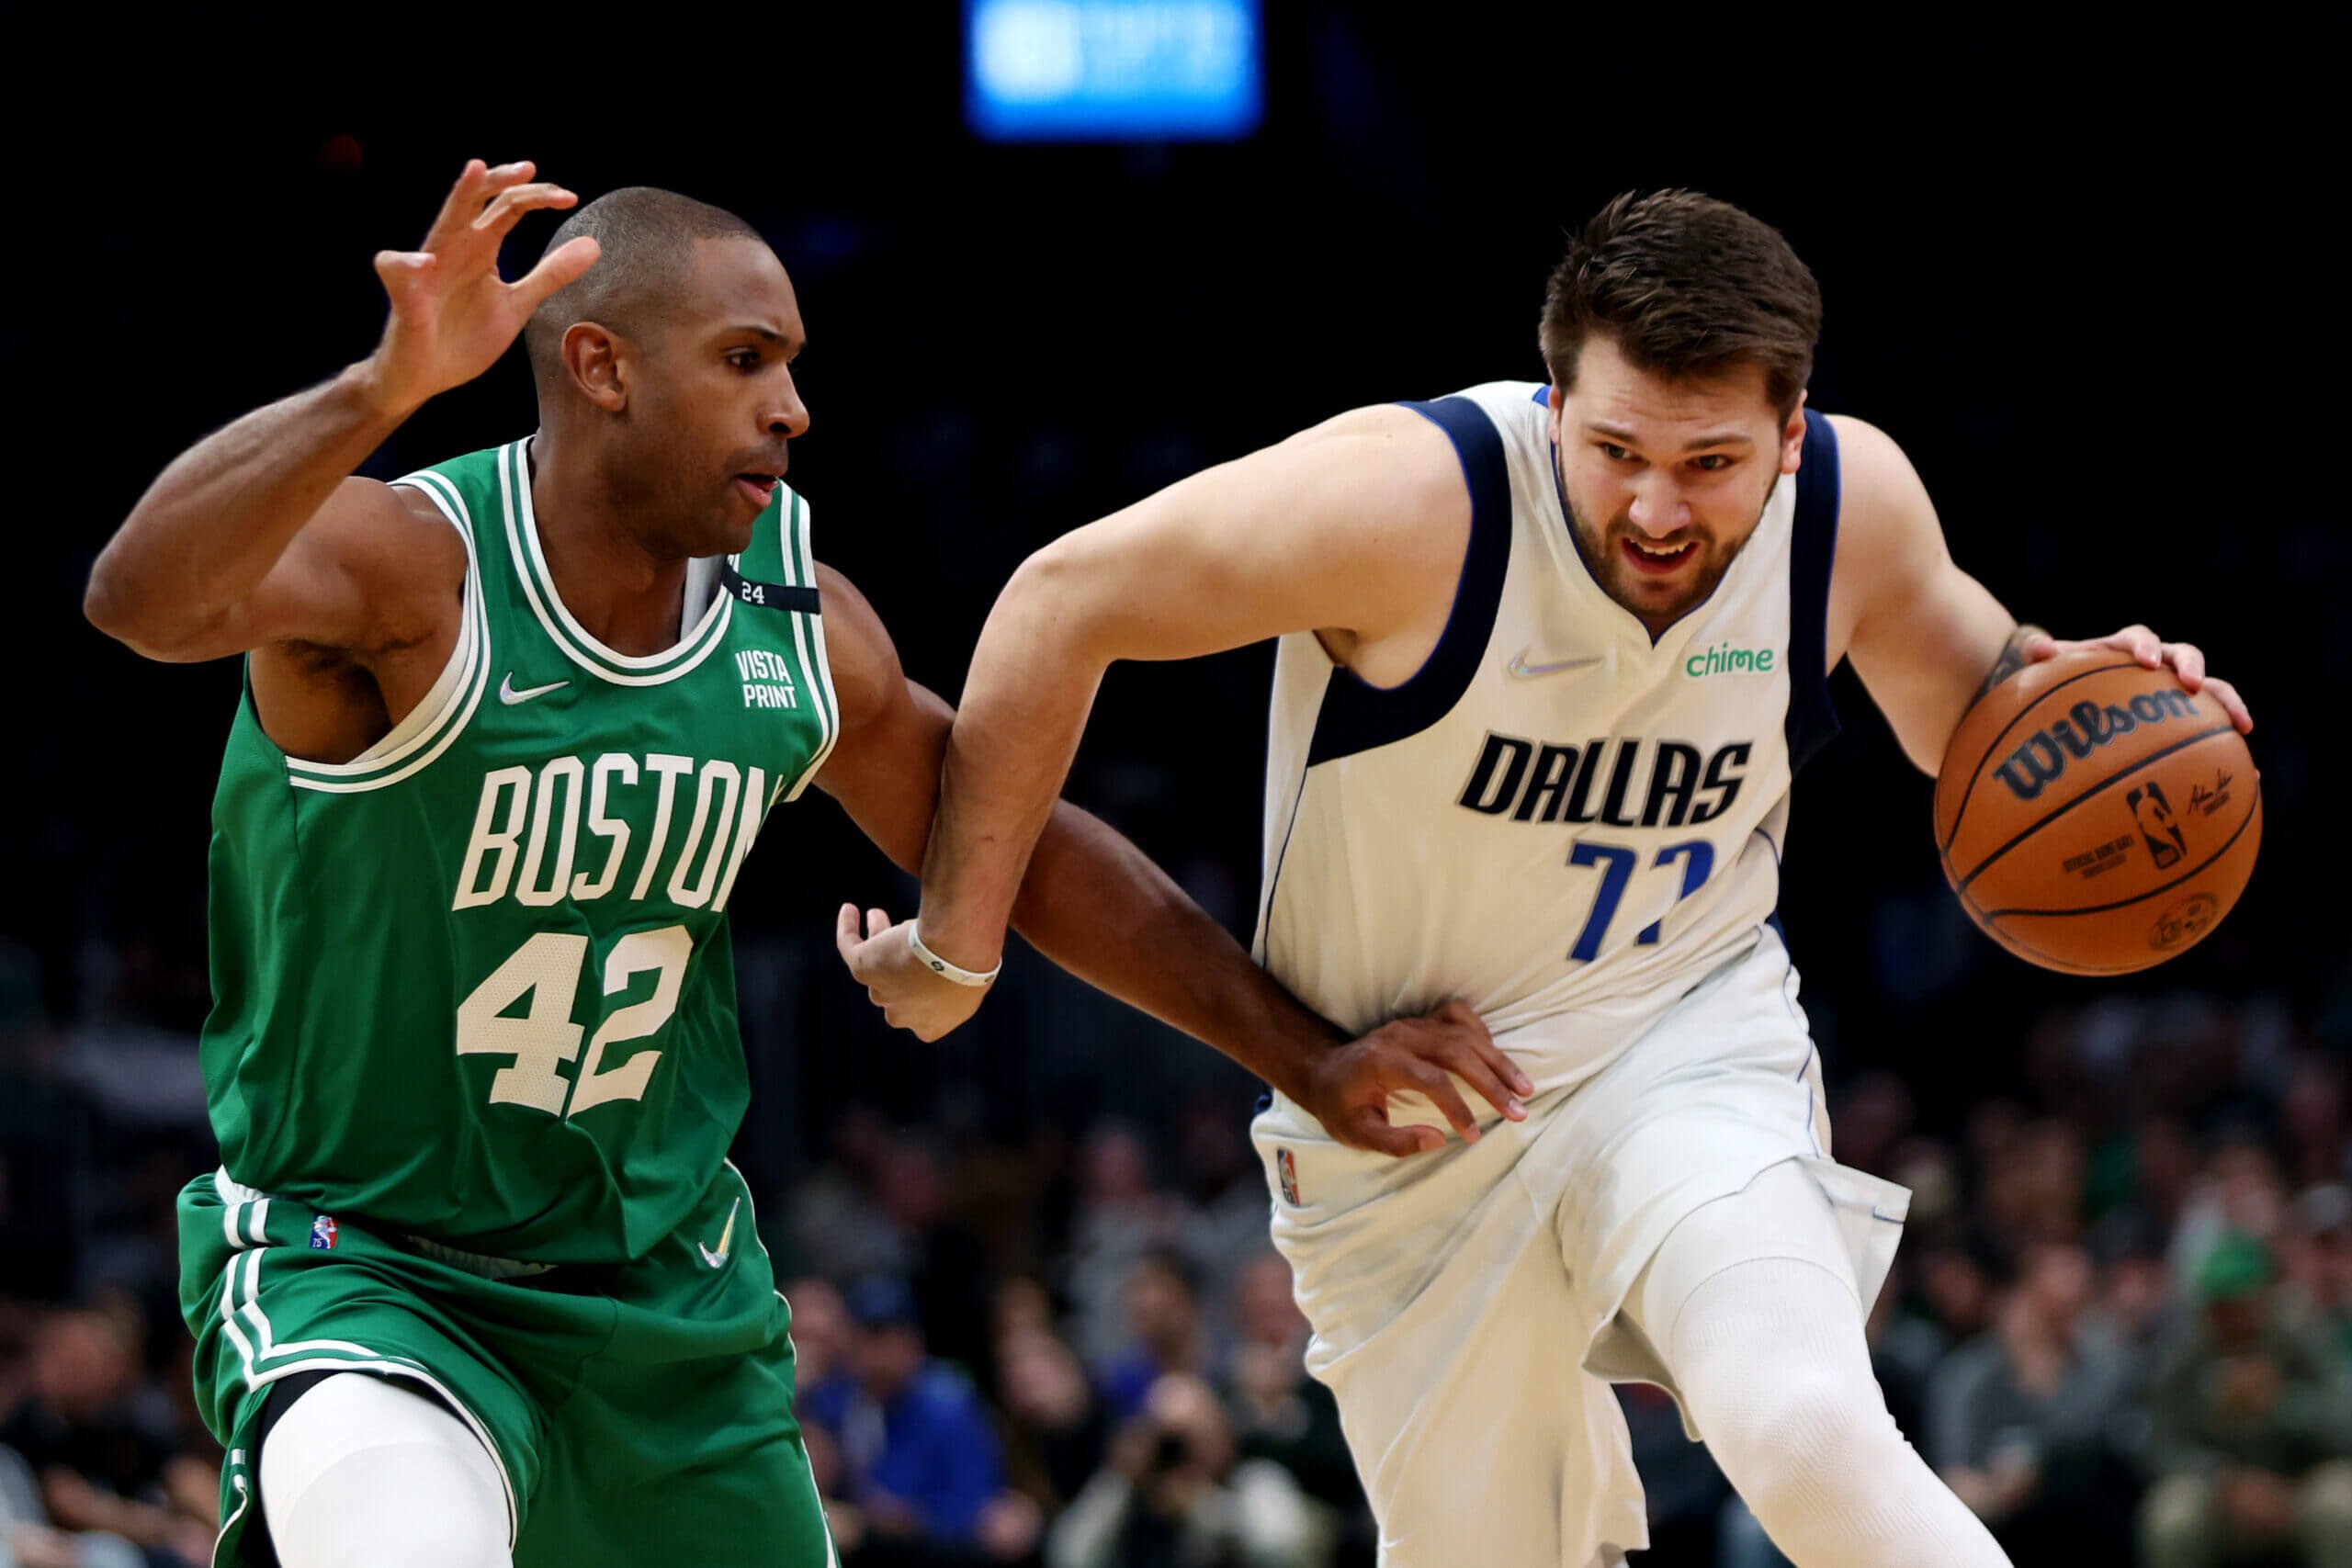 In the NBA Finals, Celtics and Mavs face different challenges than what they just overcame